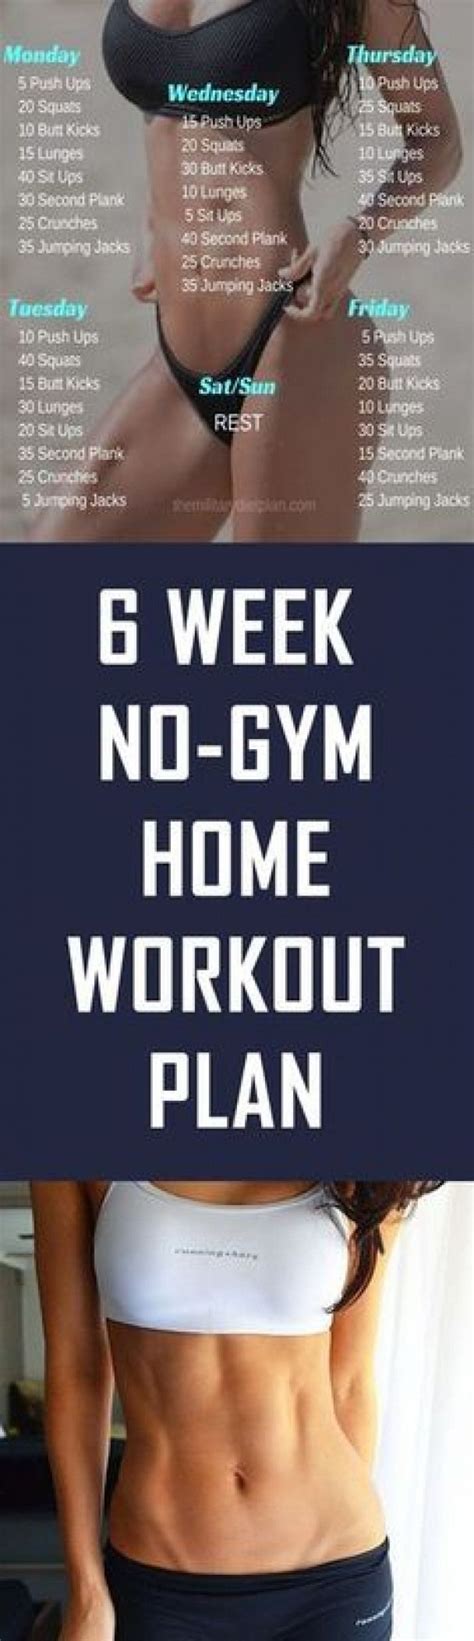 Do the workout in the privacy of your home anytime you want! 6 Week No-Gym Home Workout Plan #dietworkout | Workout ...